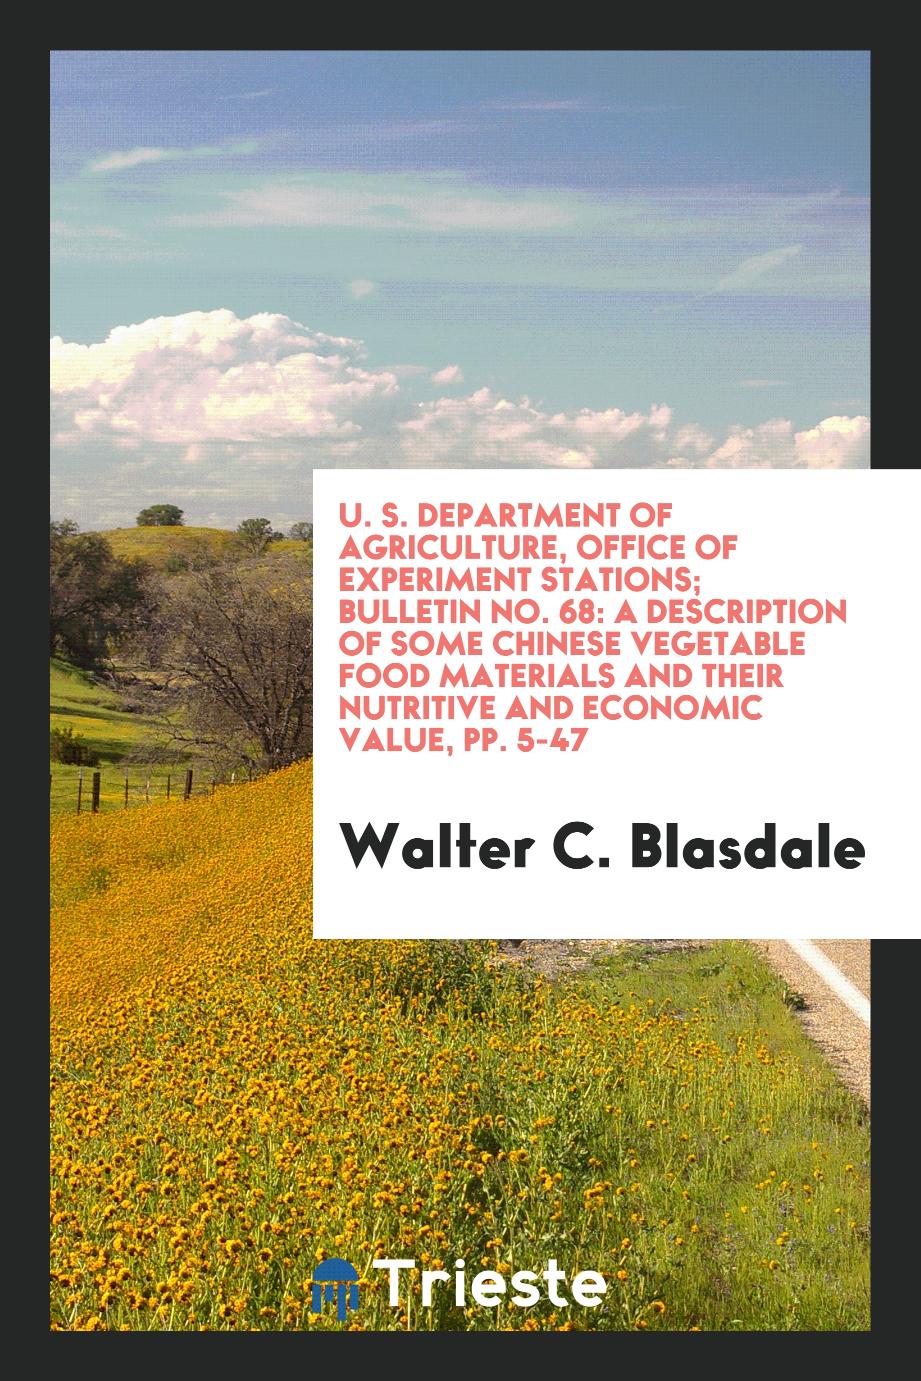 U. S. Department of Agriculture, Office of experiment stations; Bulletin No. 68: A Description of Some Chinese Vegetable Food Materials and Their Nutritive and economic value, pp. 5-47